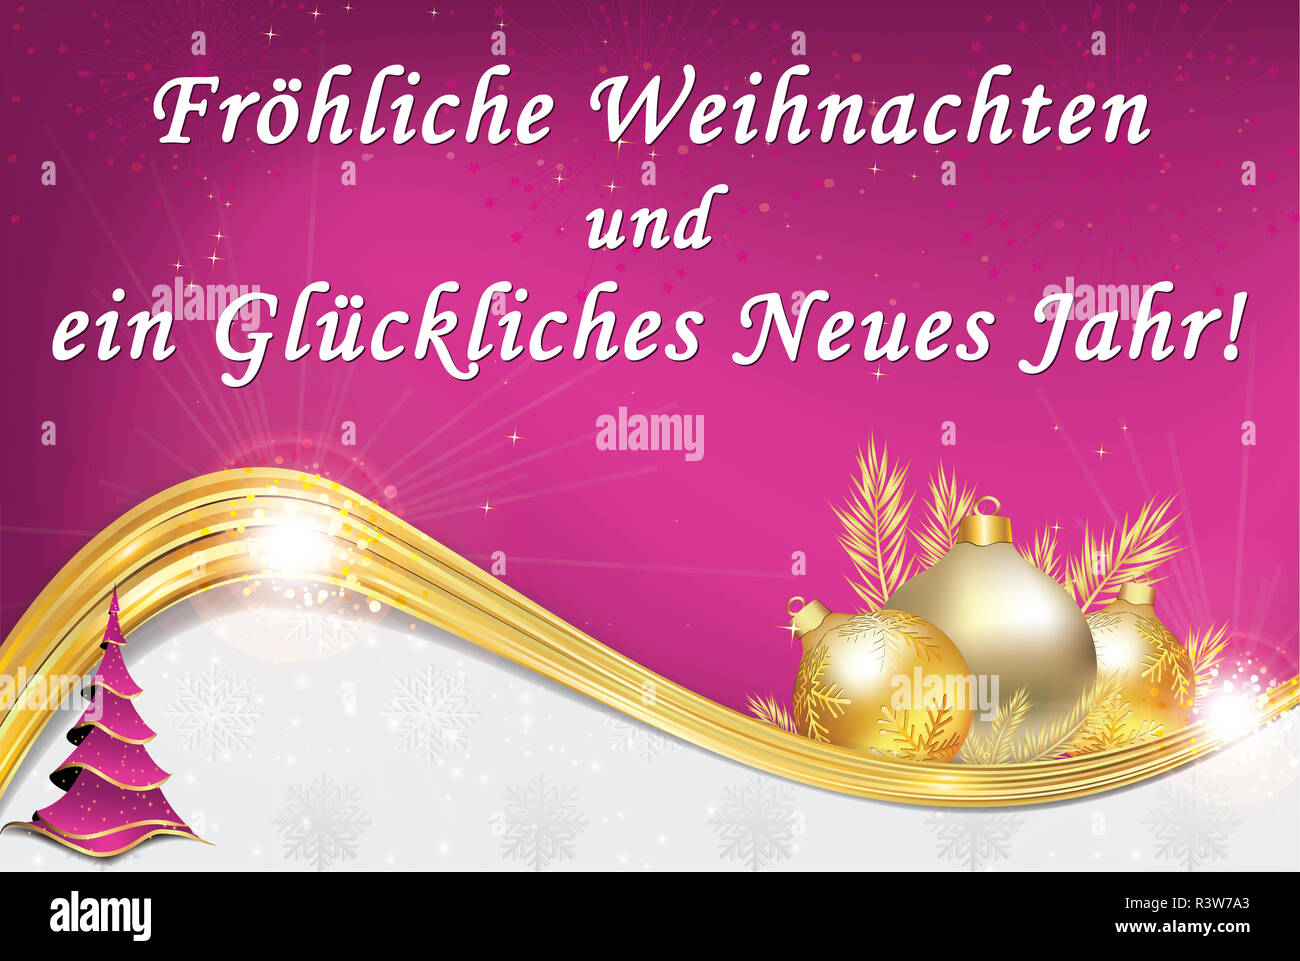 Merry Christmas And Happy New Year Greetings In German - Germany Wallpaper